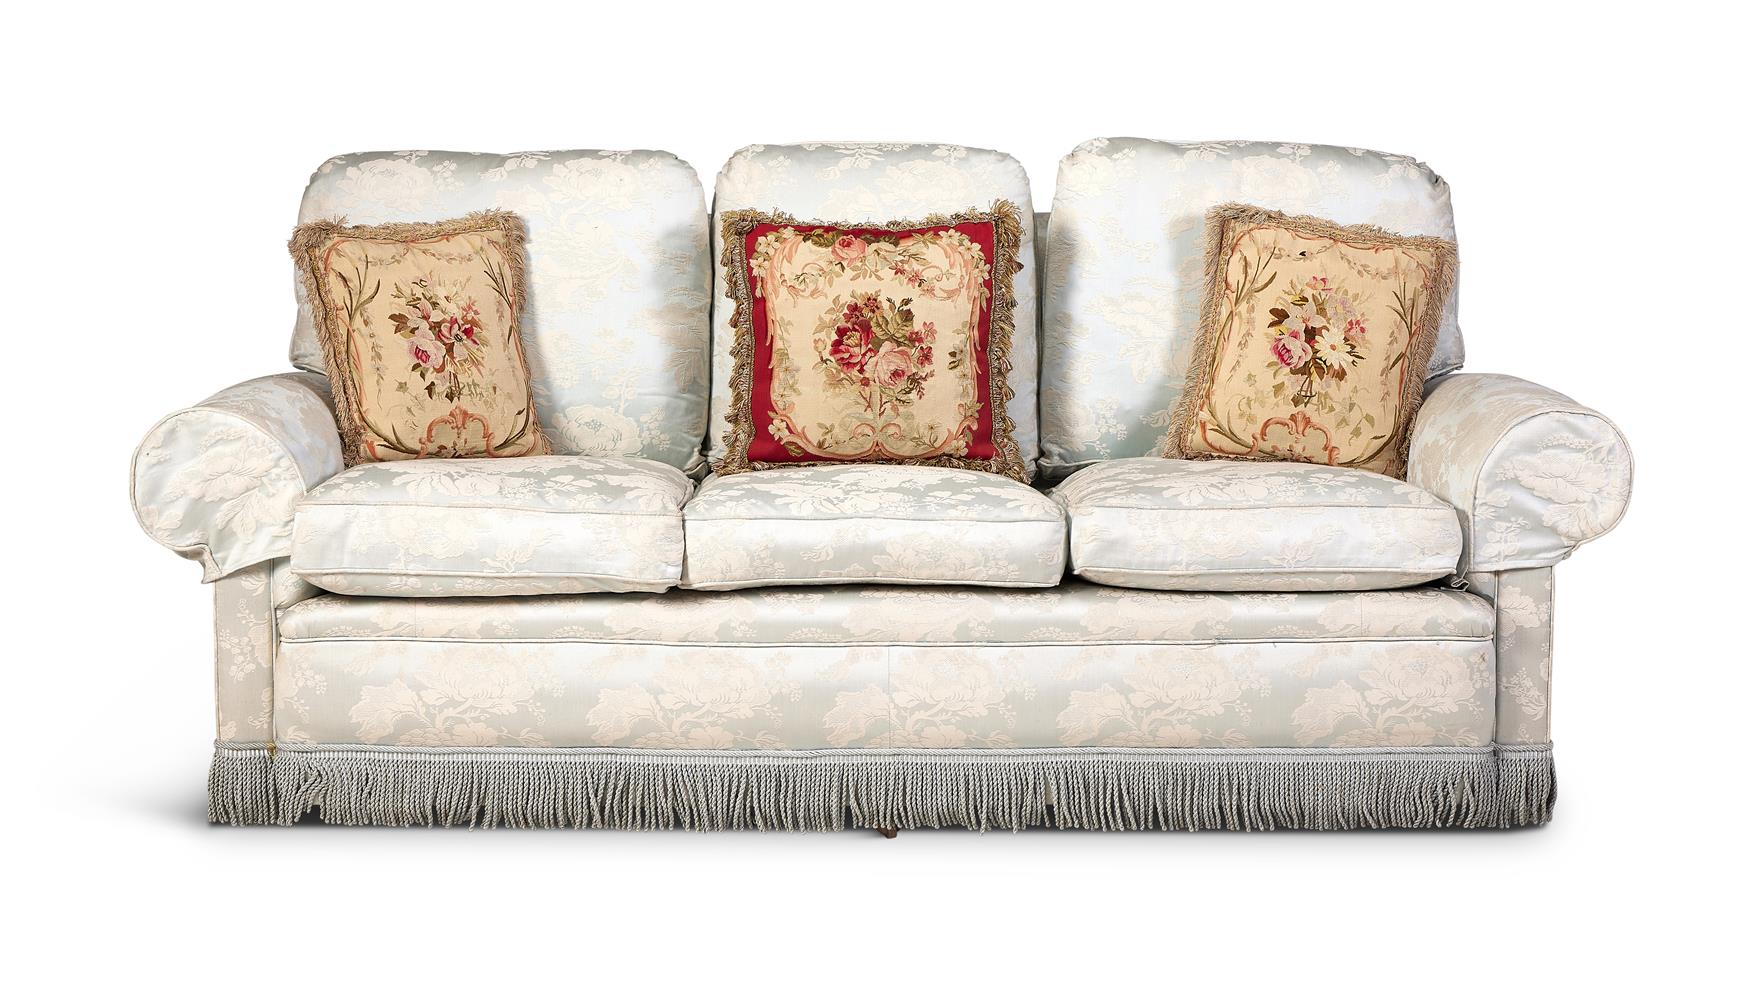 A DAMASK UPHOLSTERED THREE-SEAT SOFAIN THE MANNER OF HOWARD & SONS - Image 3 of 3